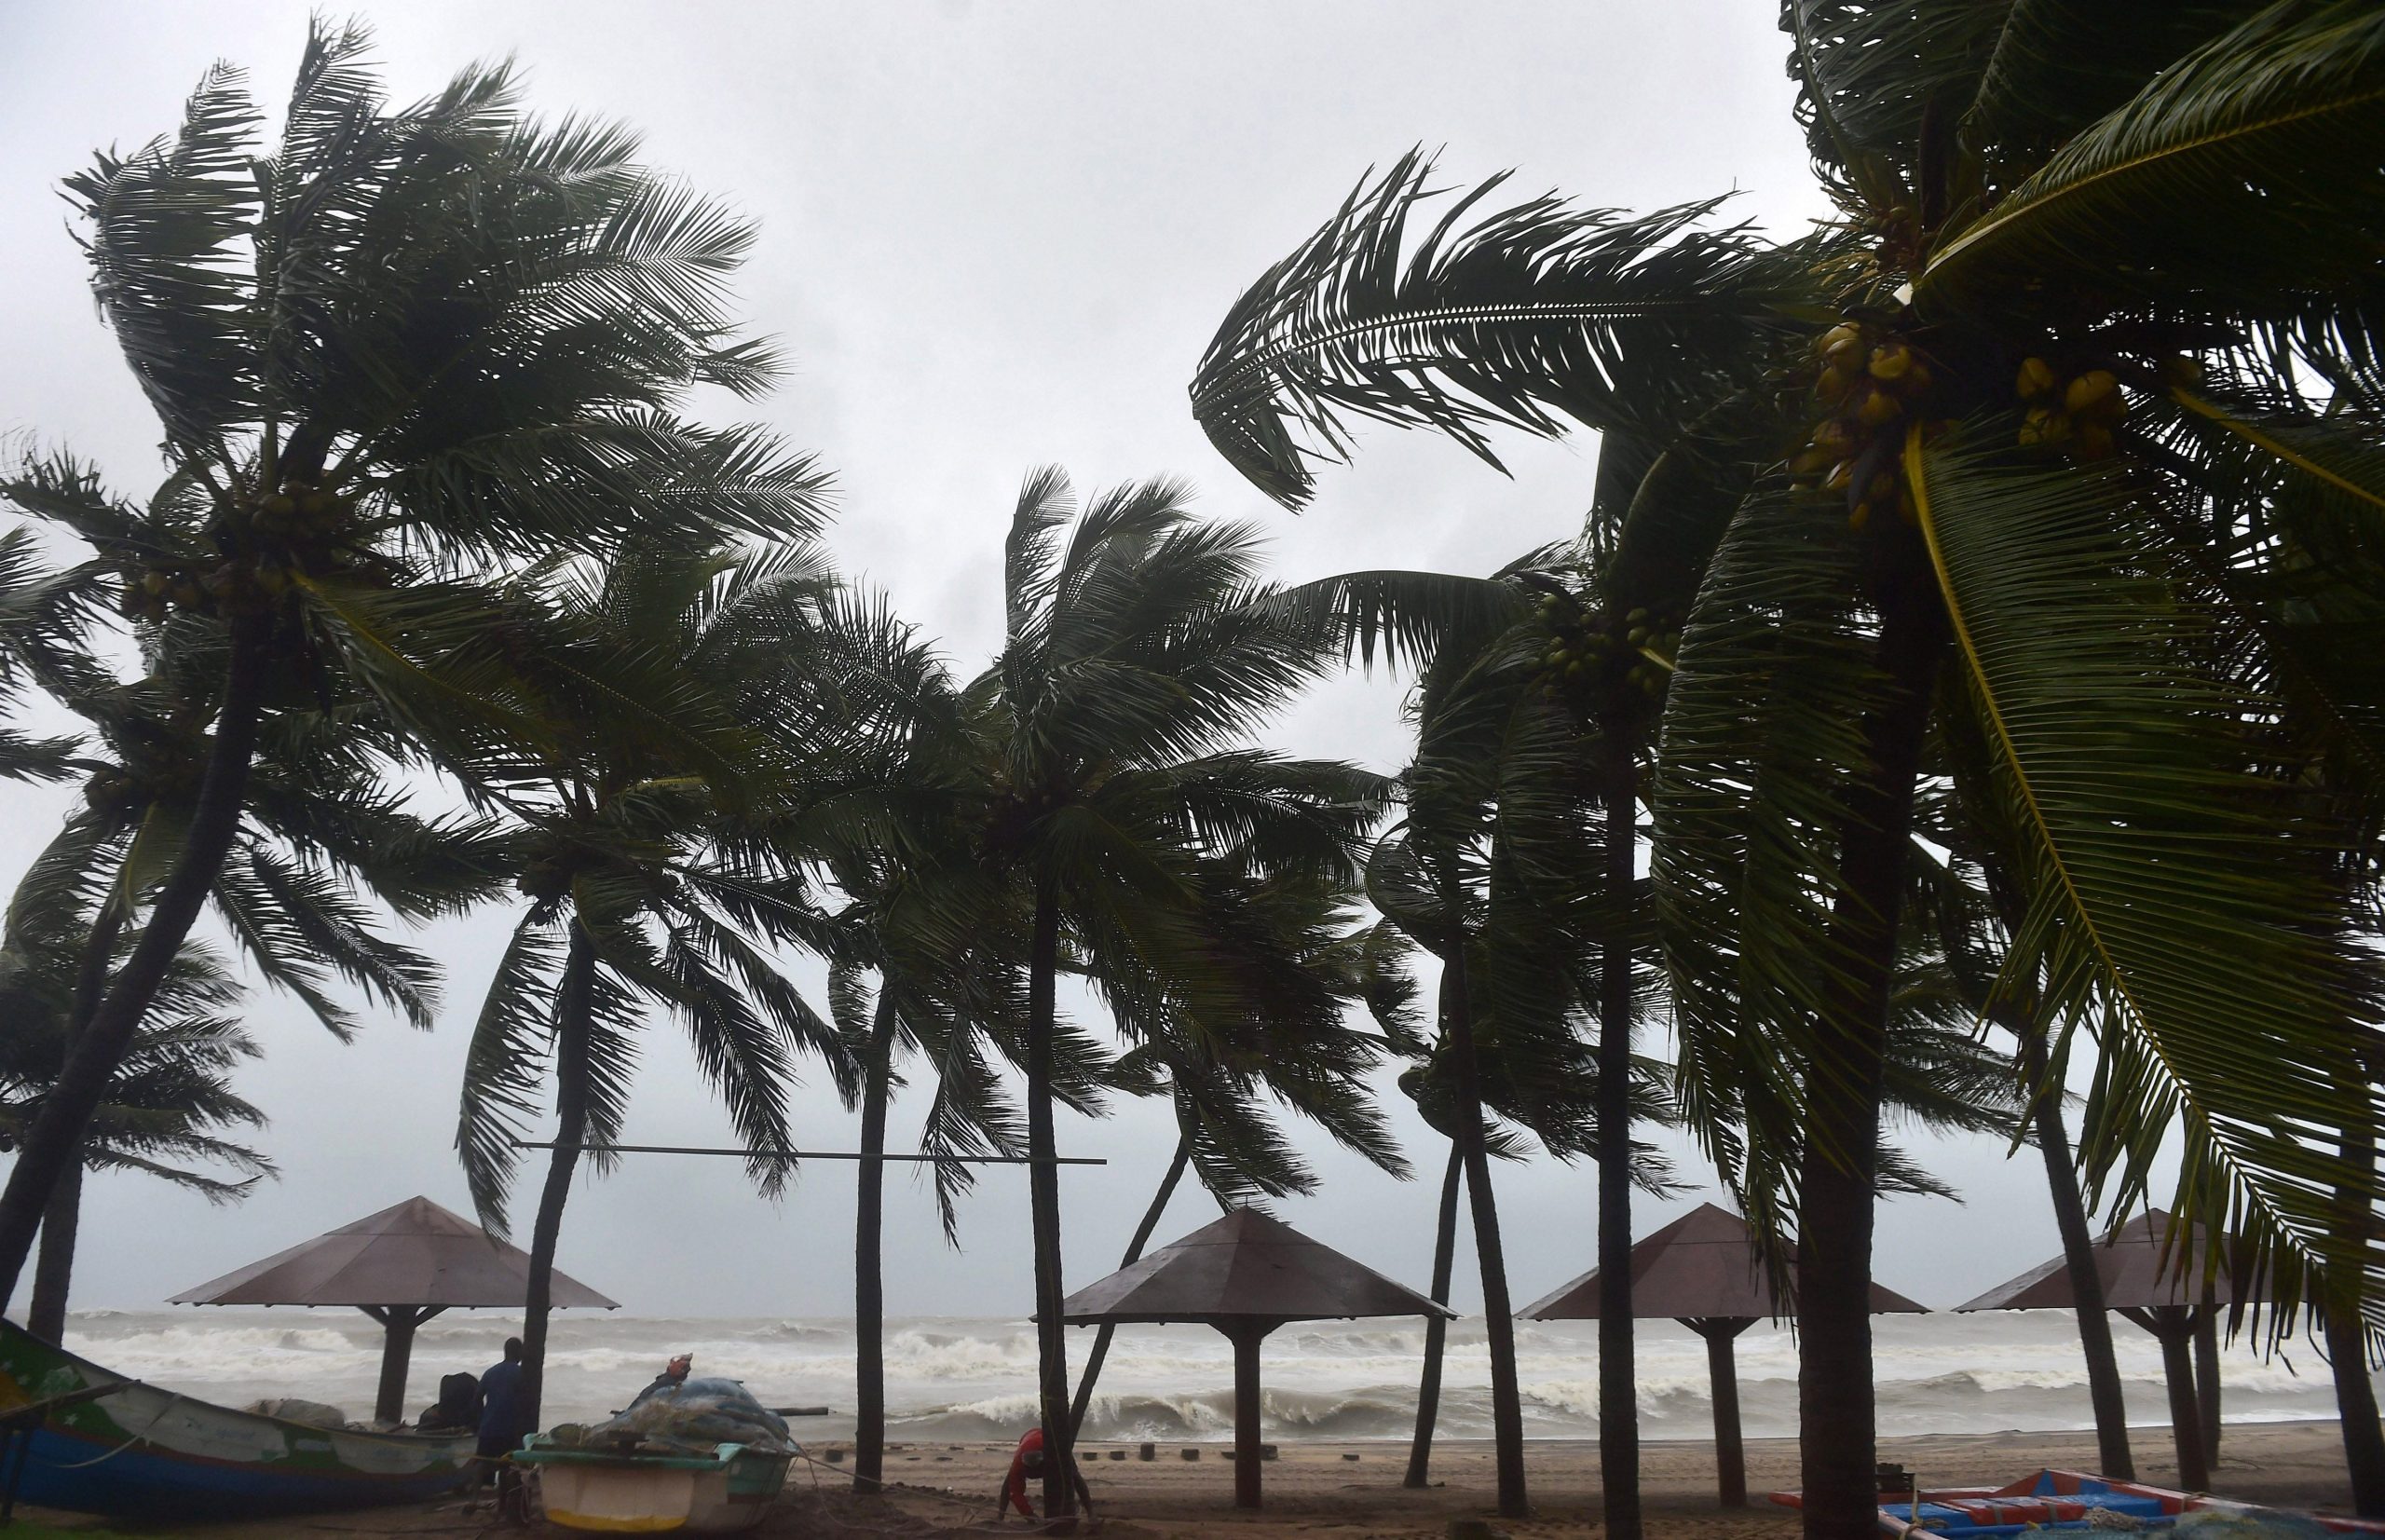 Cyclone Nivar to intensify into severe cyclonic storm, Thursday declared as holiday